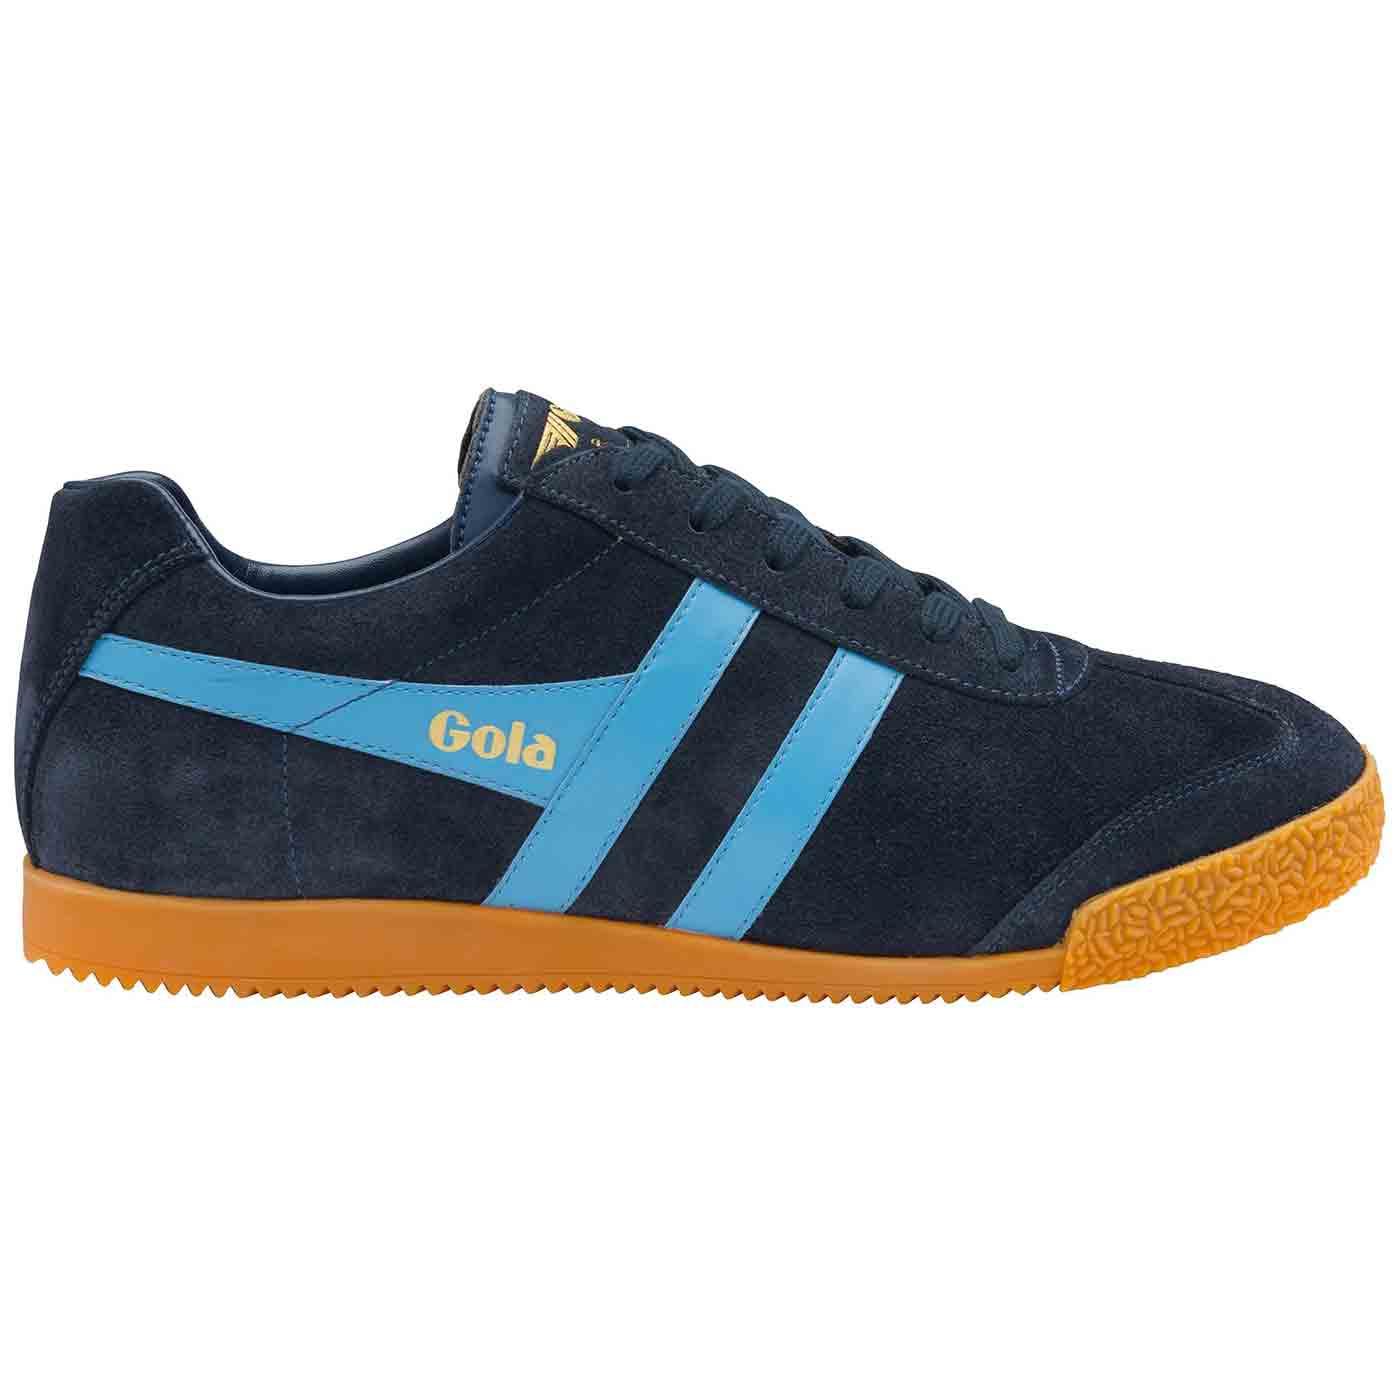 GOLA Harrier Suede Womens Retro 90s Trainers (N/C)